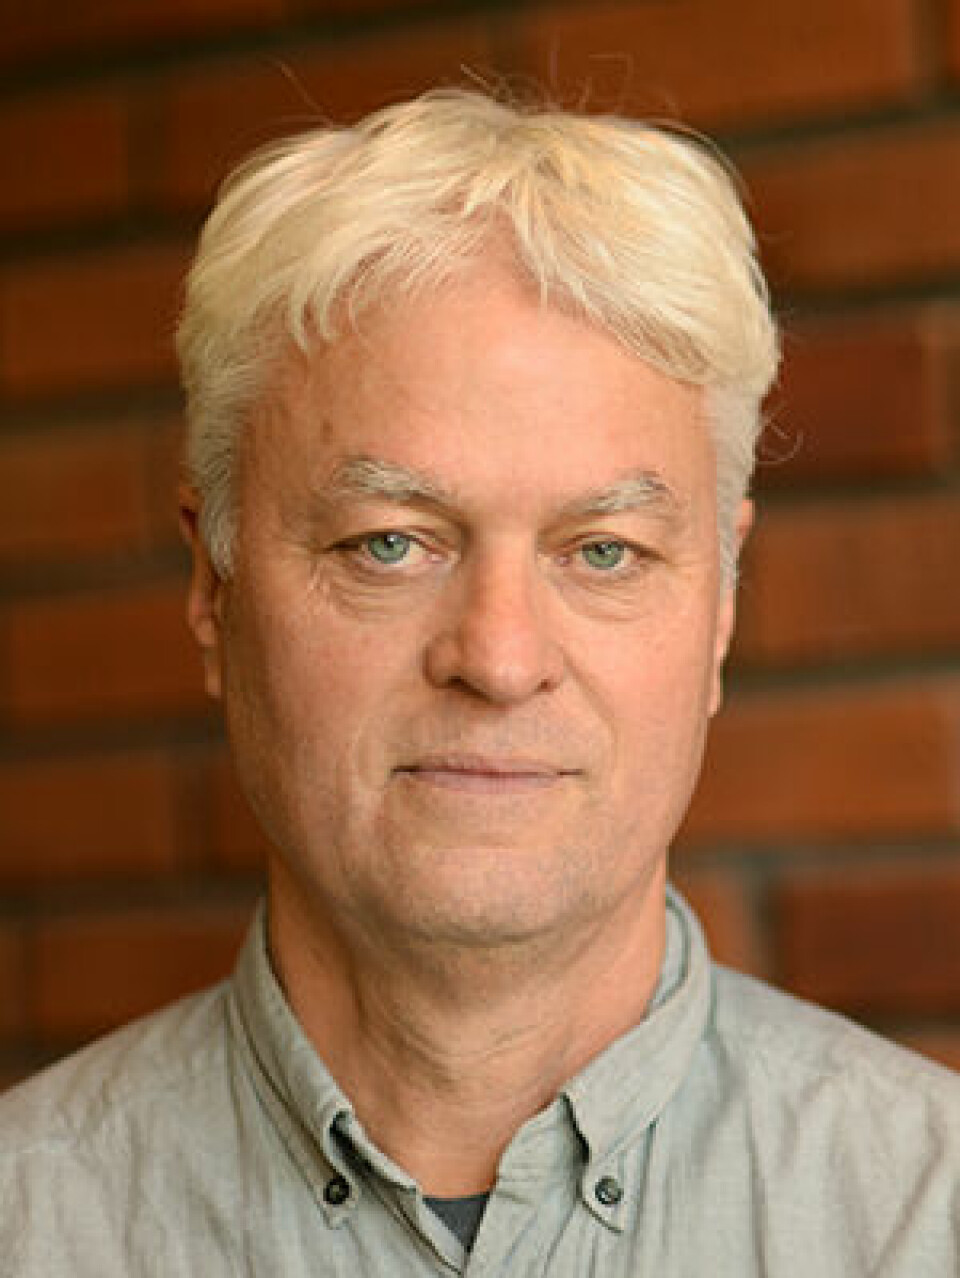 Dag Tuastad is a researcher in Middle Eastern Studies at the University of Oslo.